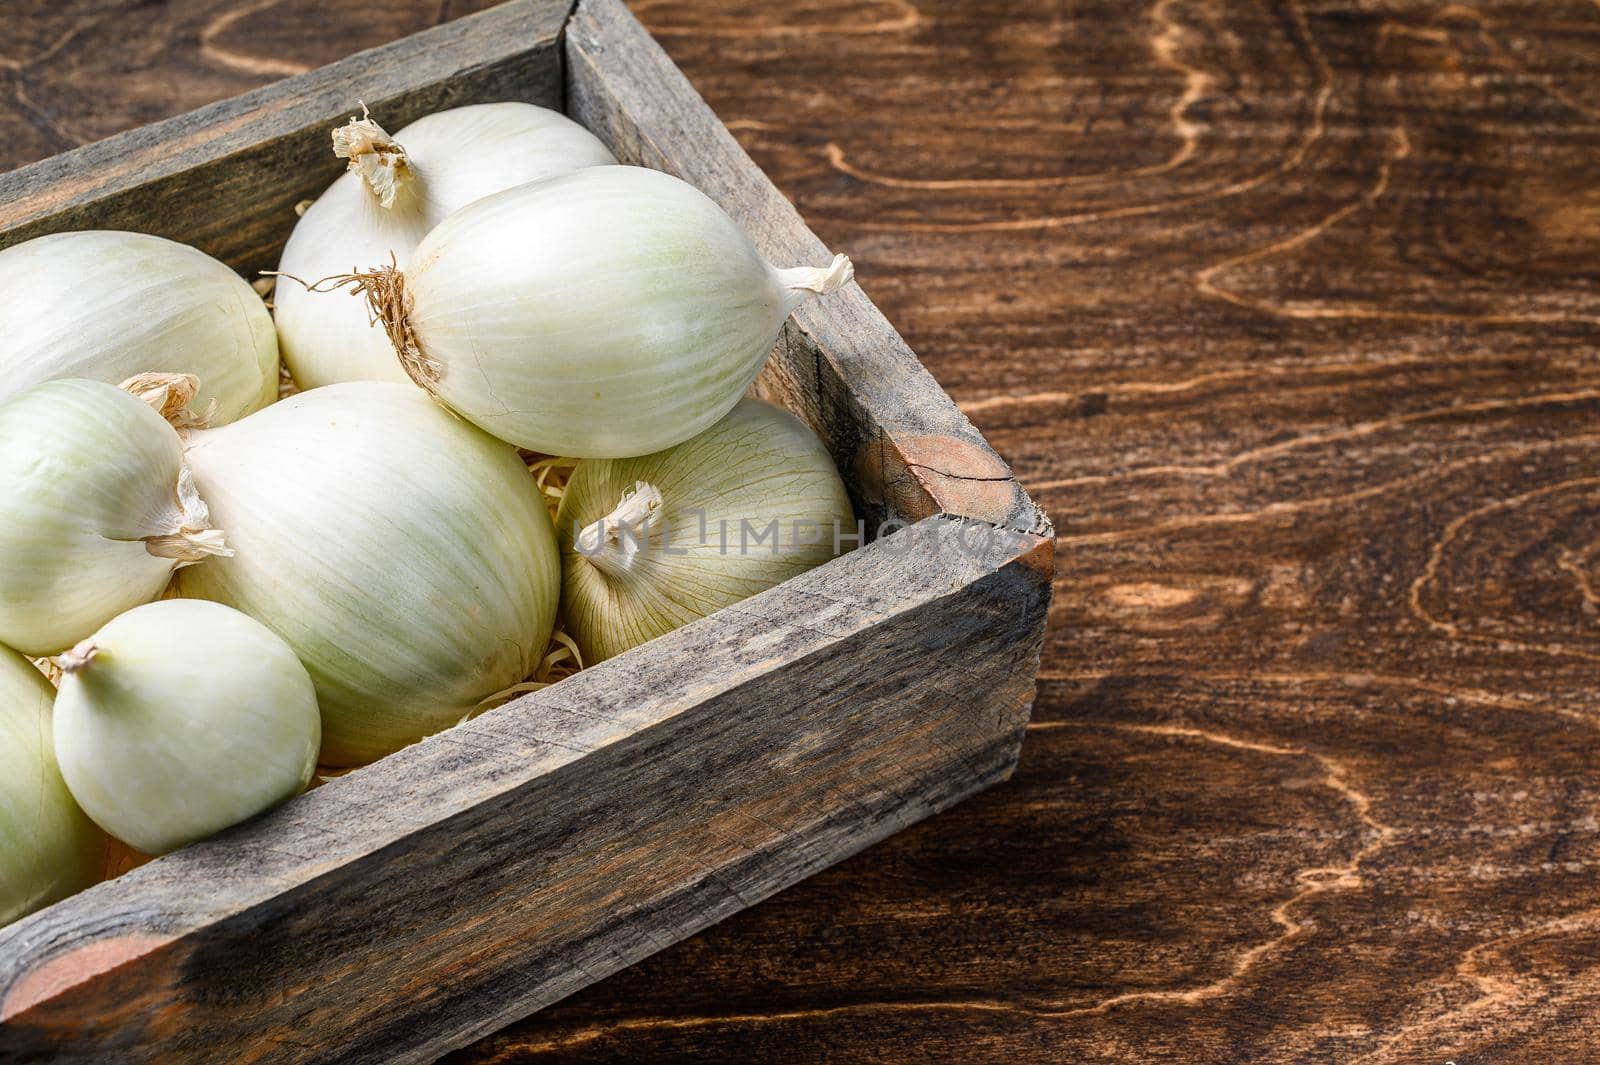 White raw onion in wooden box. Wooden background. Top view. Copy space by Composter